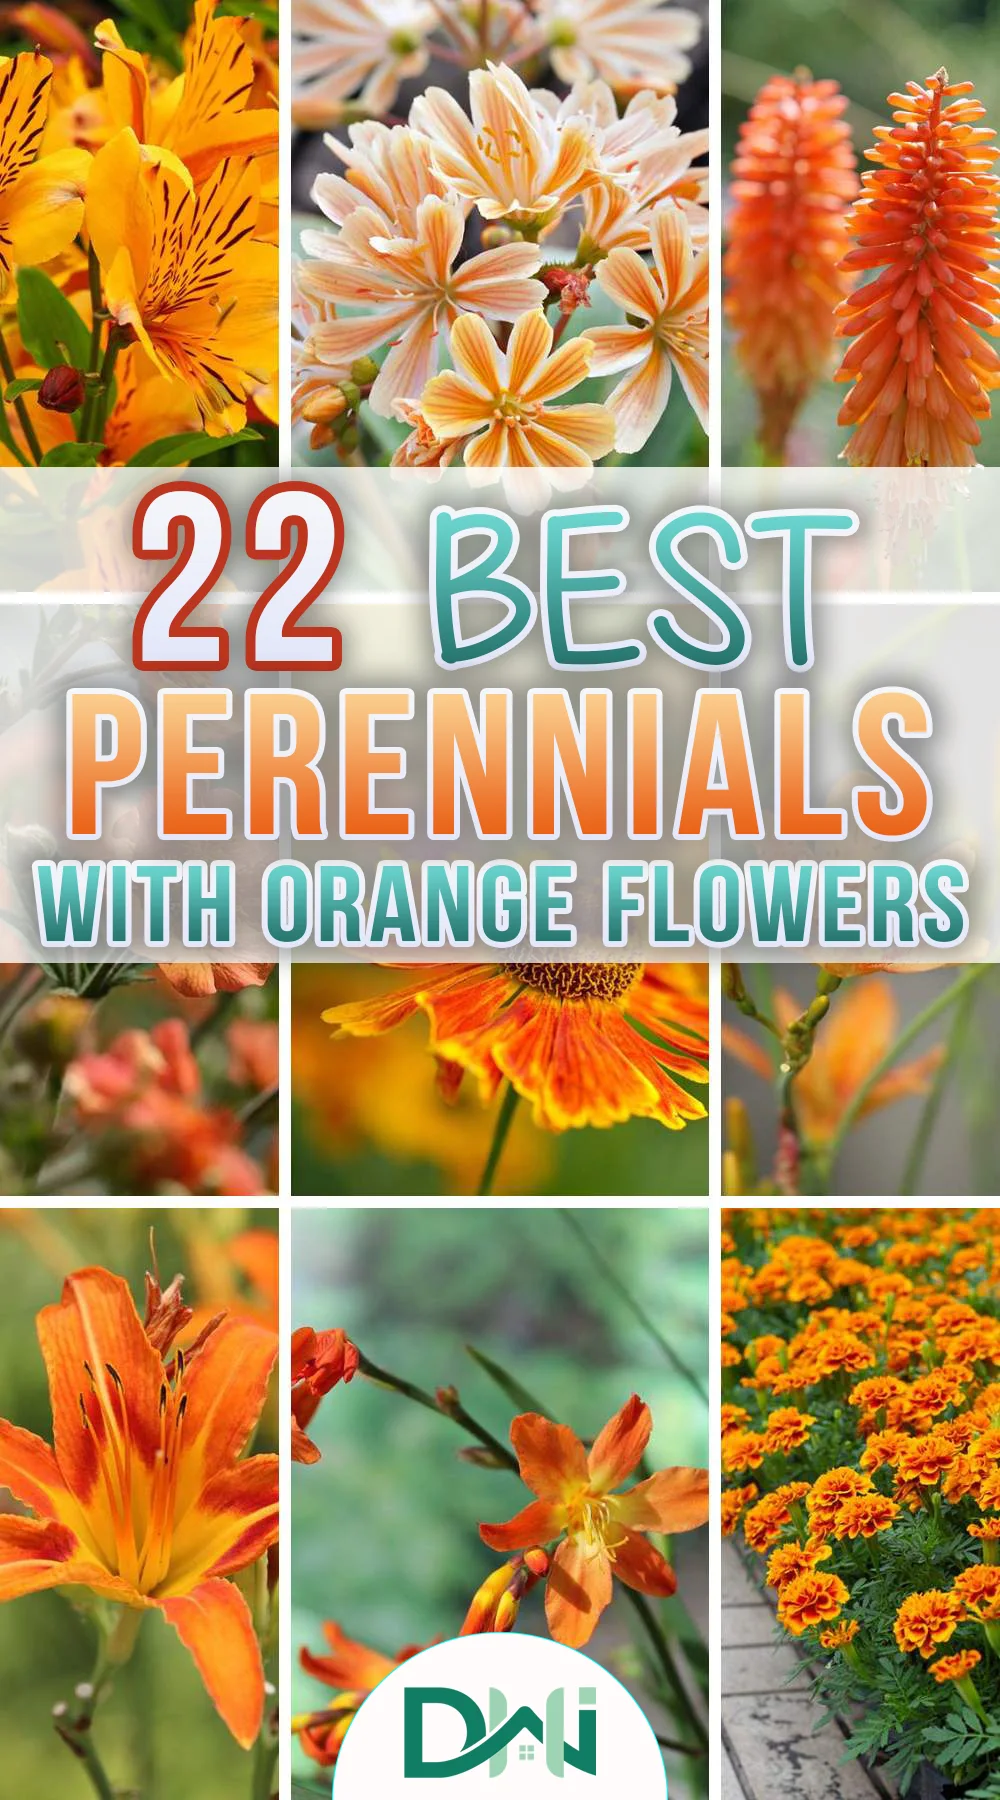 Give your garden rich orange color with these fabulous perennials that will grow year after year — easy care of orange flowering plants that will last forever.